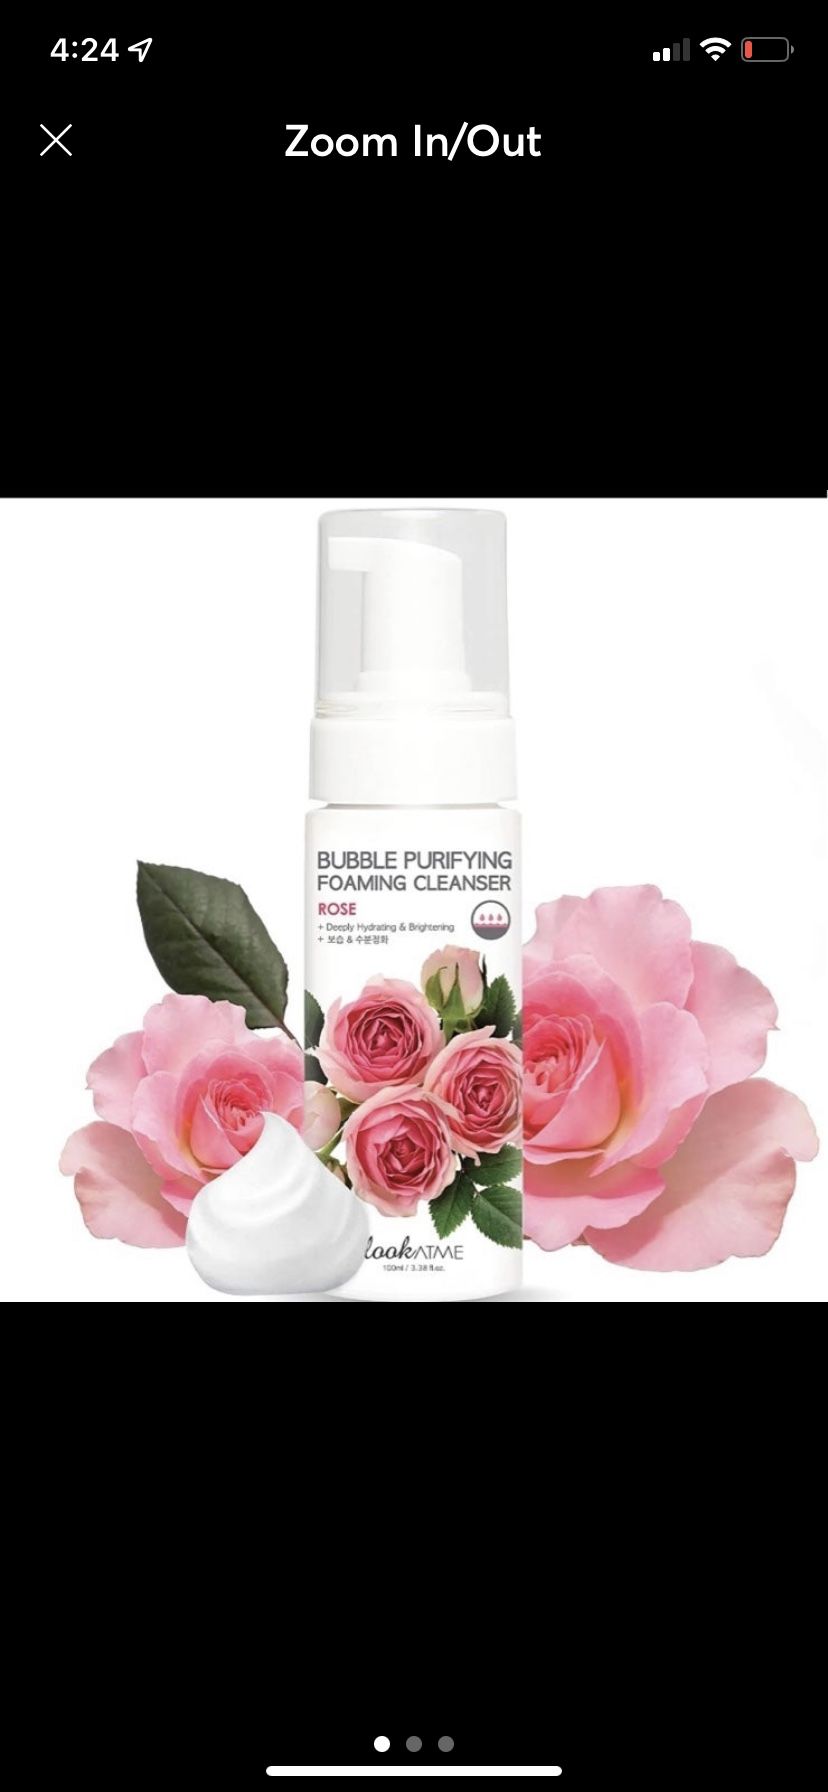 Look at Me Bubble Purifying Foaming Rose Cleanser 5.7 oz Hydrating & Brightening